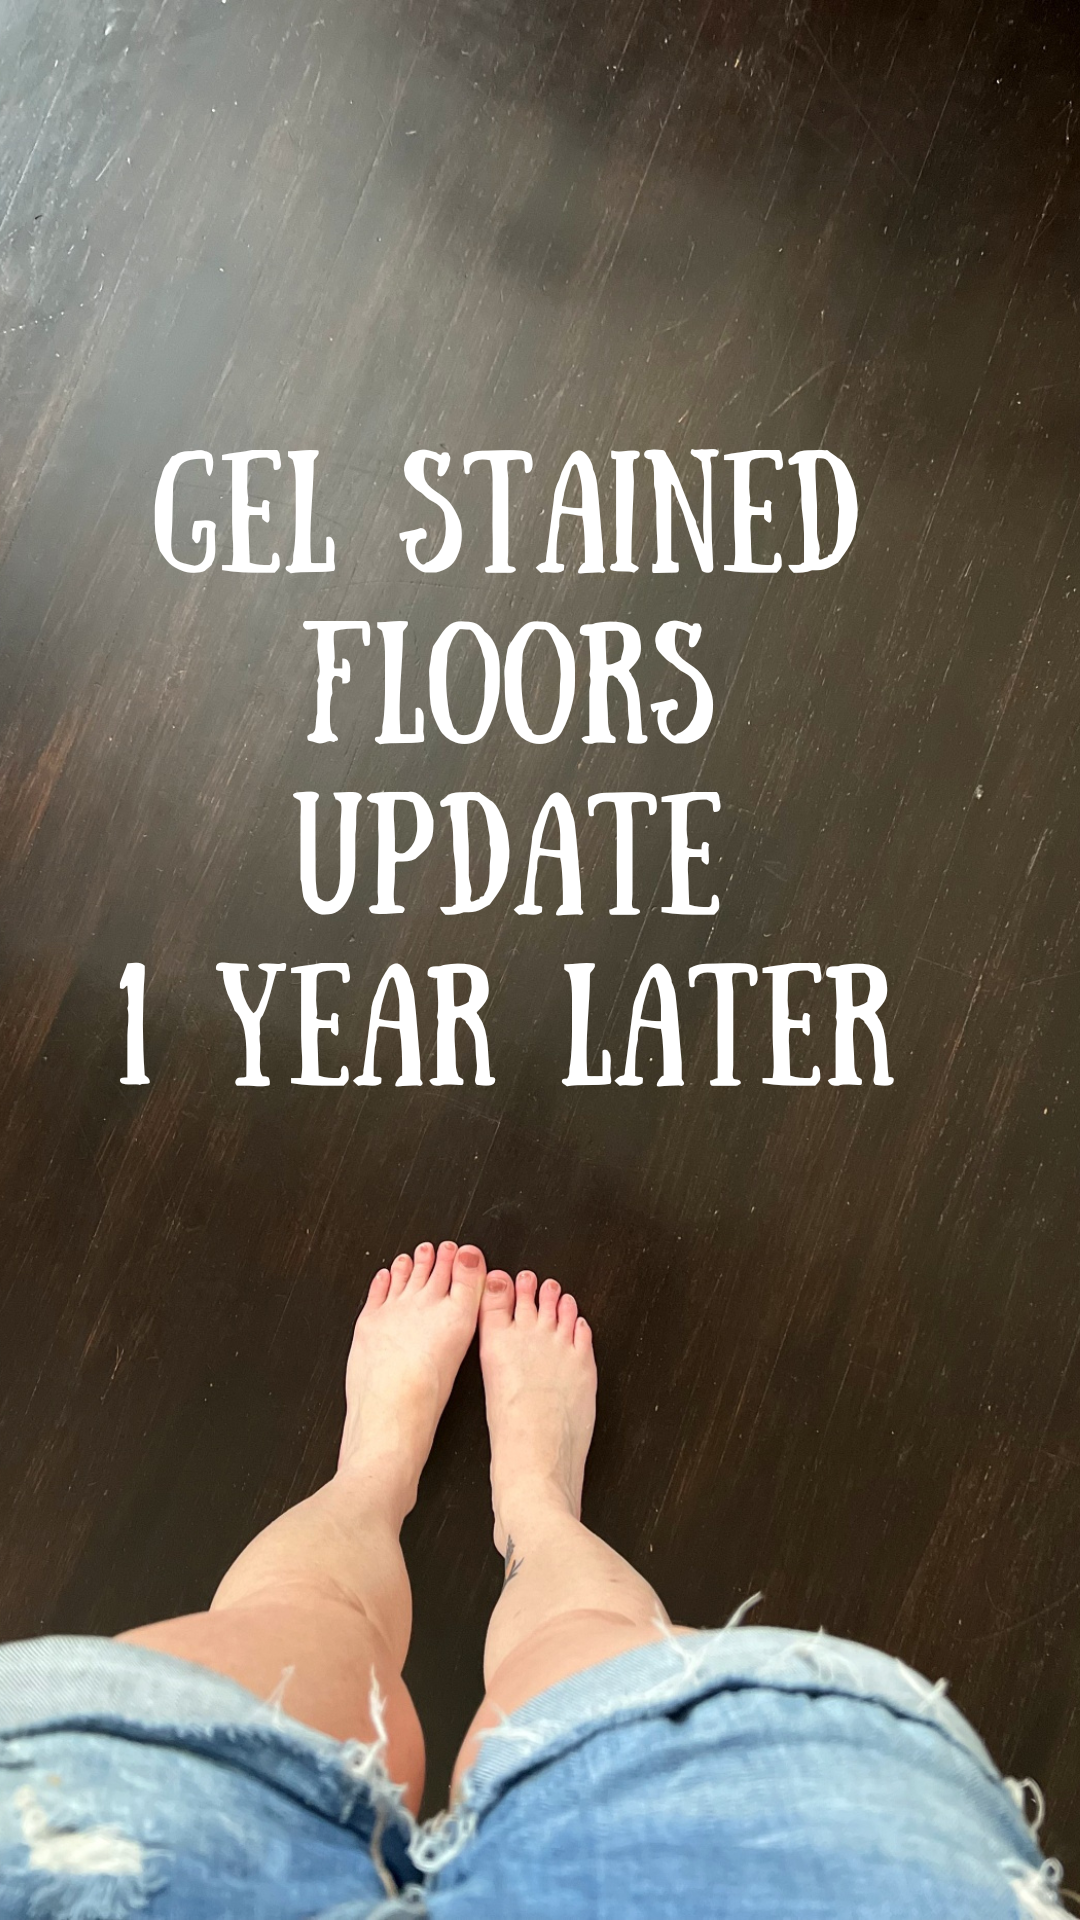 Our Gel Stained Floors UPDATE – 1 Year Later